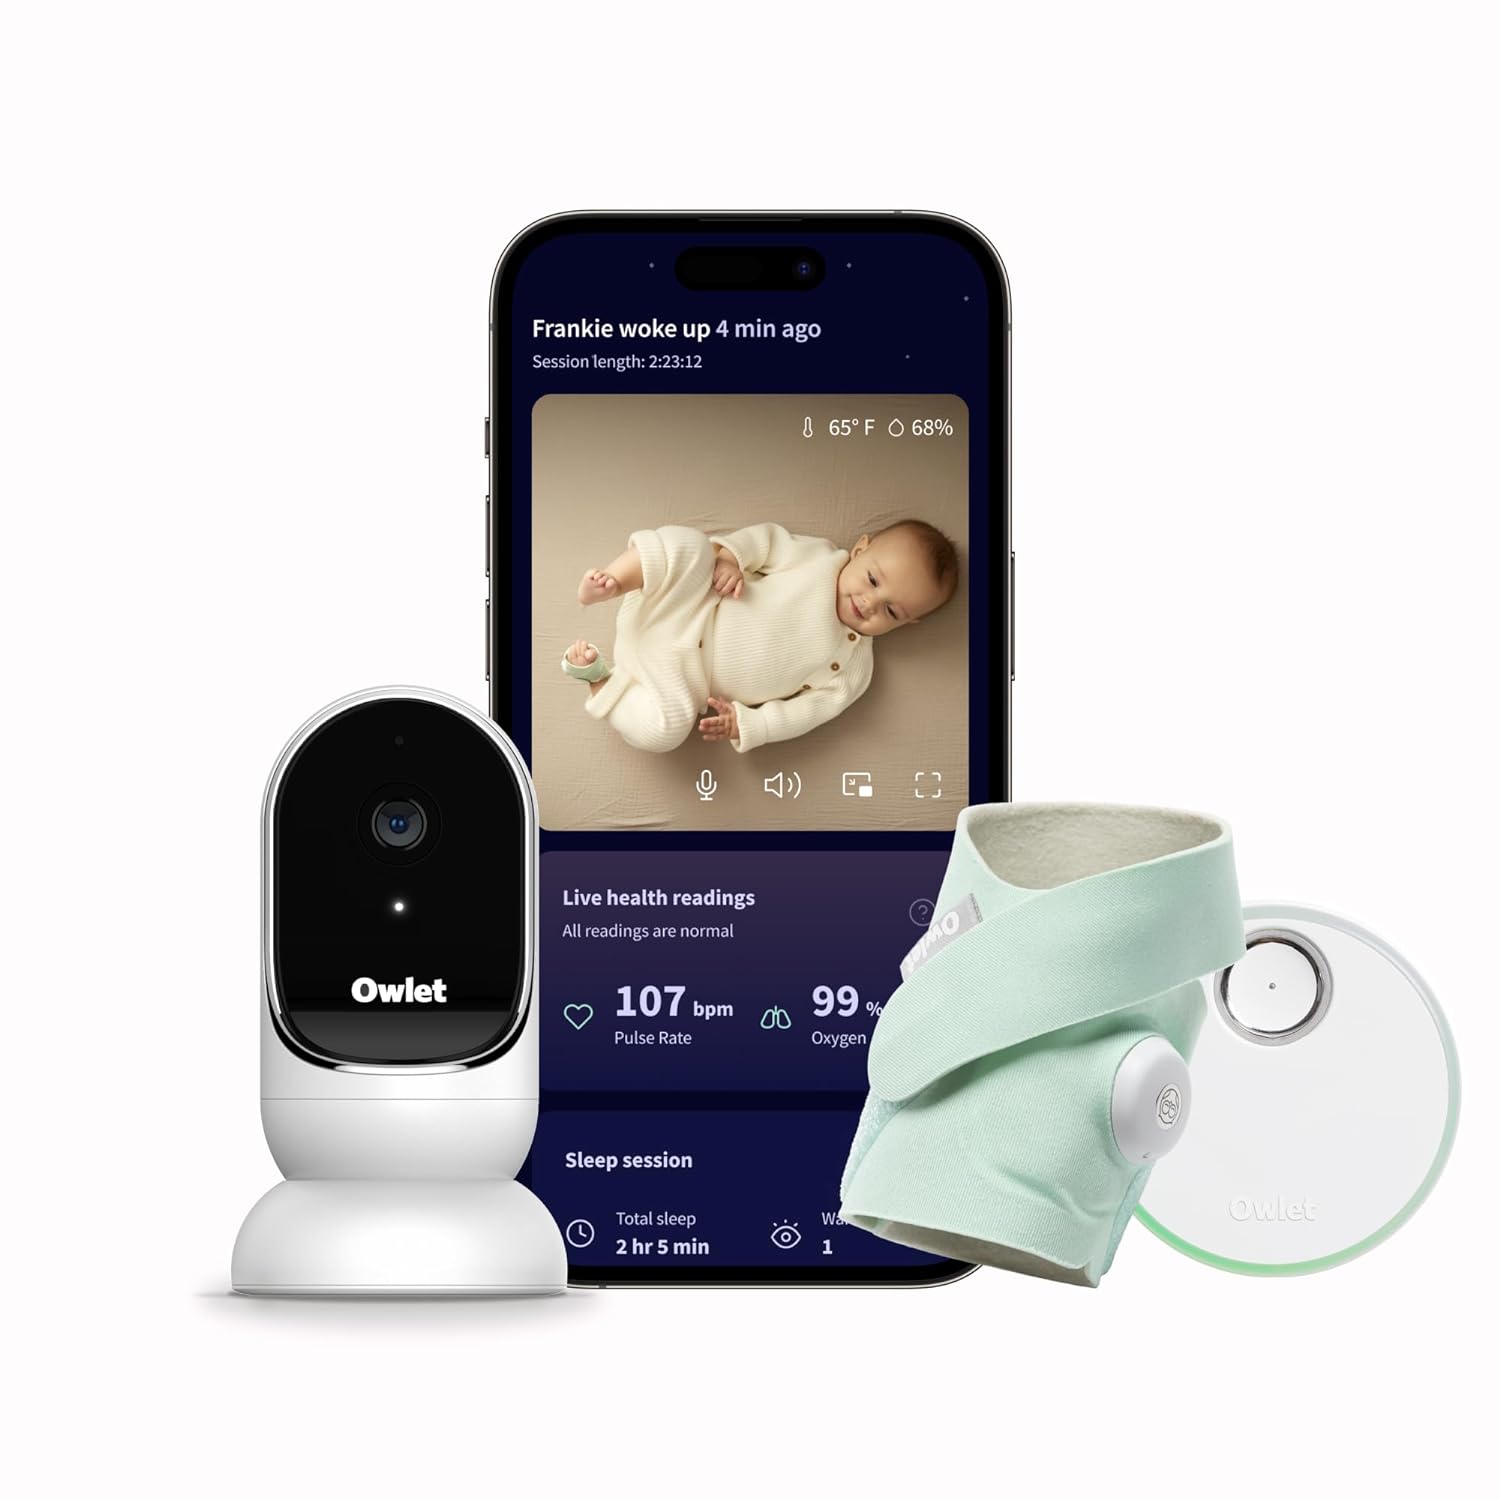 ® Dream Duo Smart Baby Monitor: Fda-Cleared Dream Sock® plus  Cam - Tracks & Notifies for Pulse Rate & Oxygen While Viewing Baby in 1080P HD Wifi Video - Mint